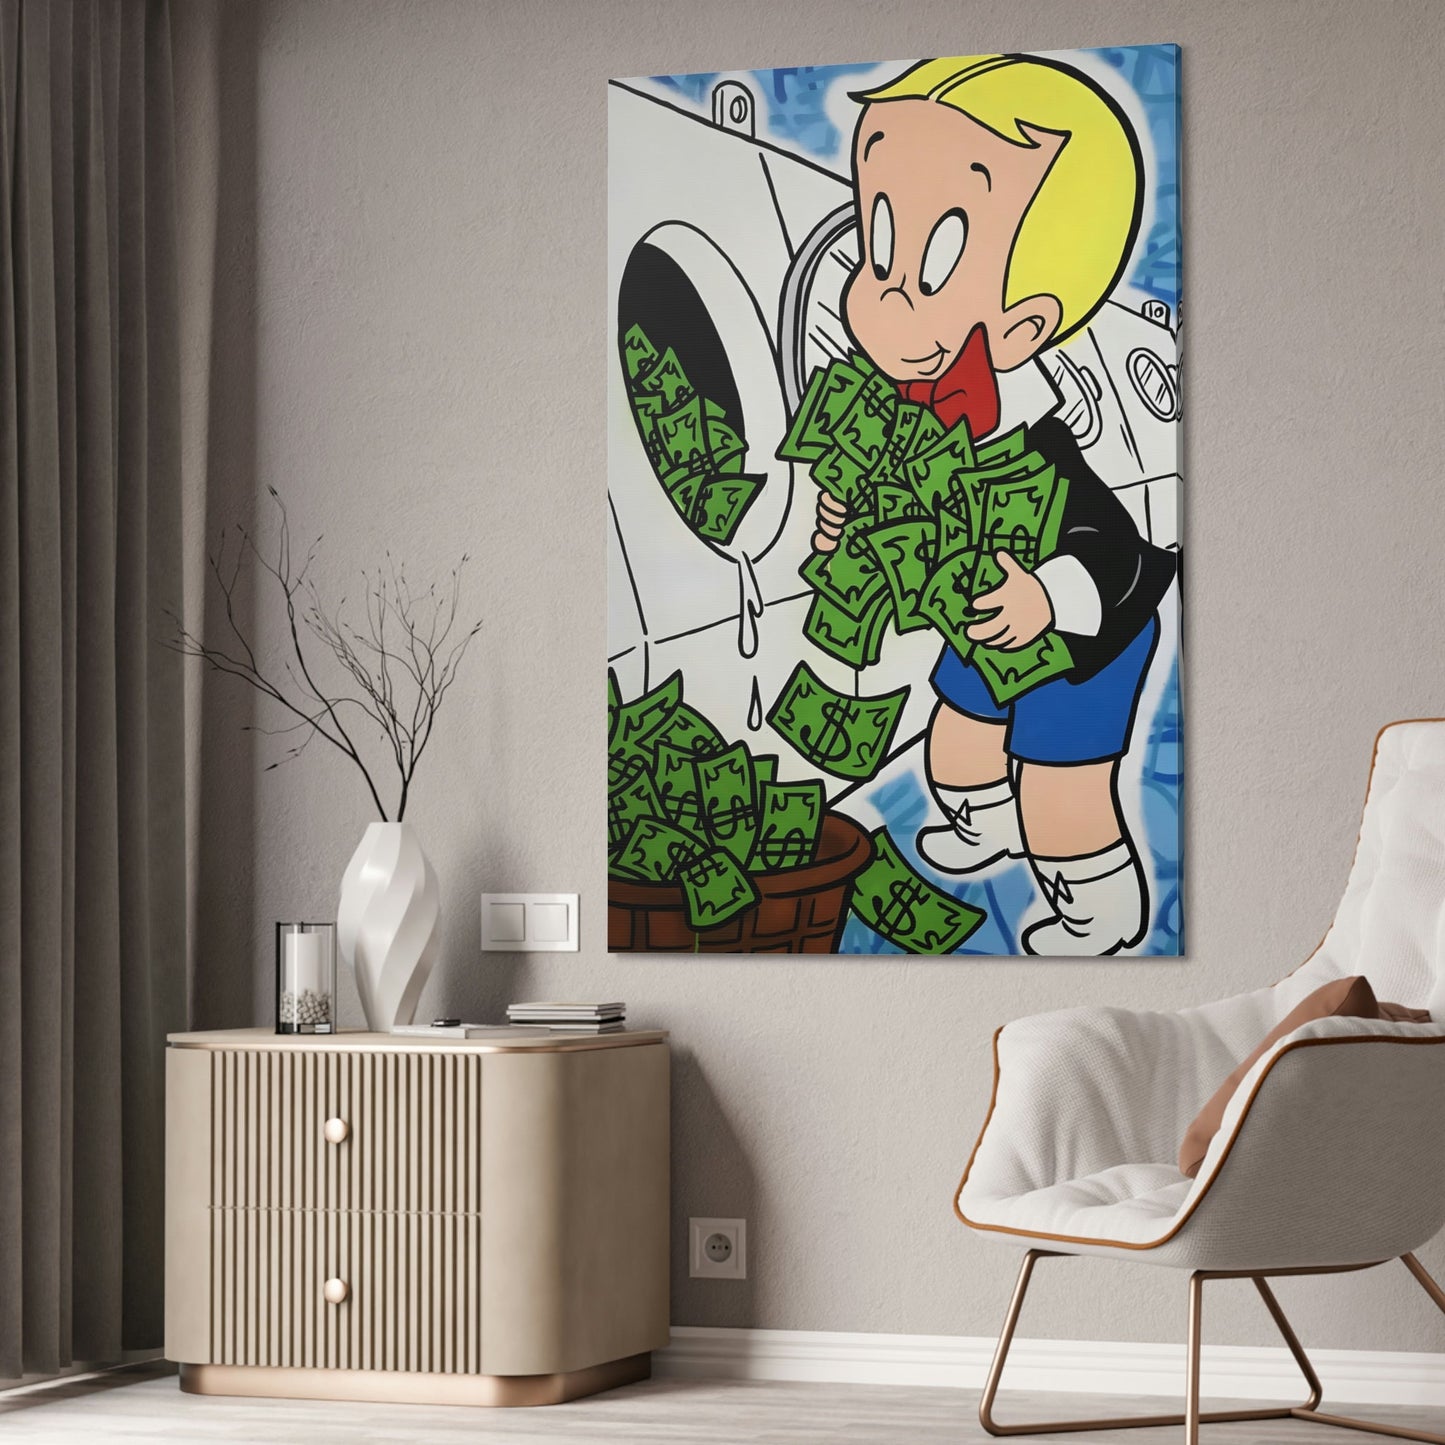 Alec Monopoly's World of Art: Iconic Canvas and Poster Prints Featuring Alec Monopoly's Signature Graffiti Style